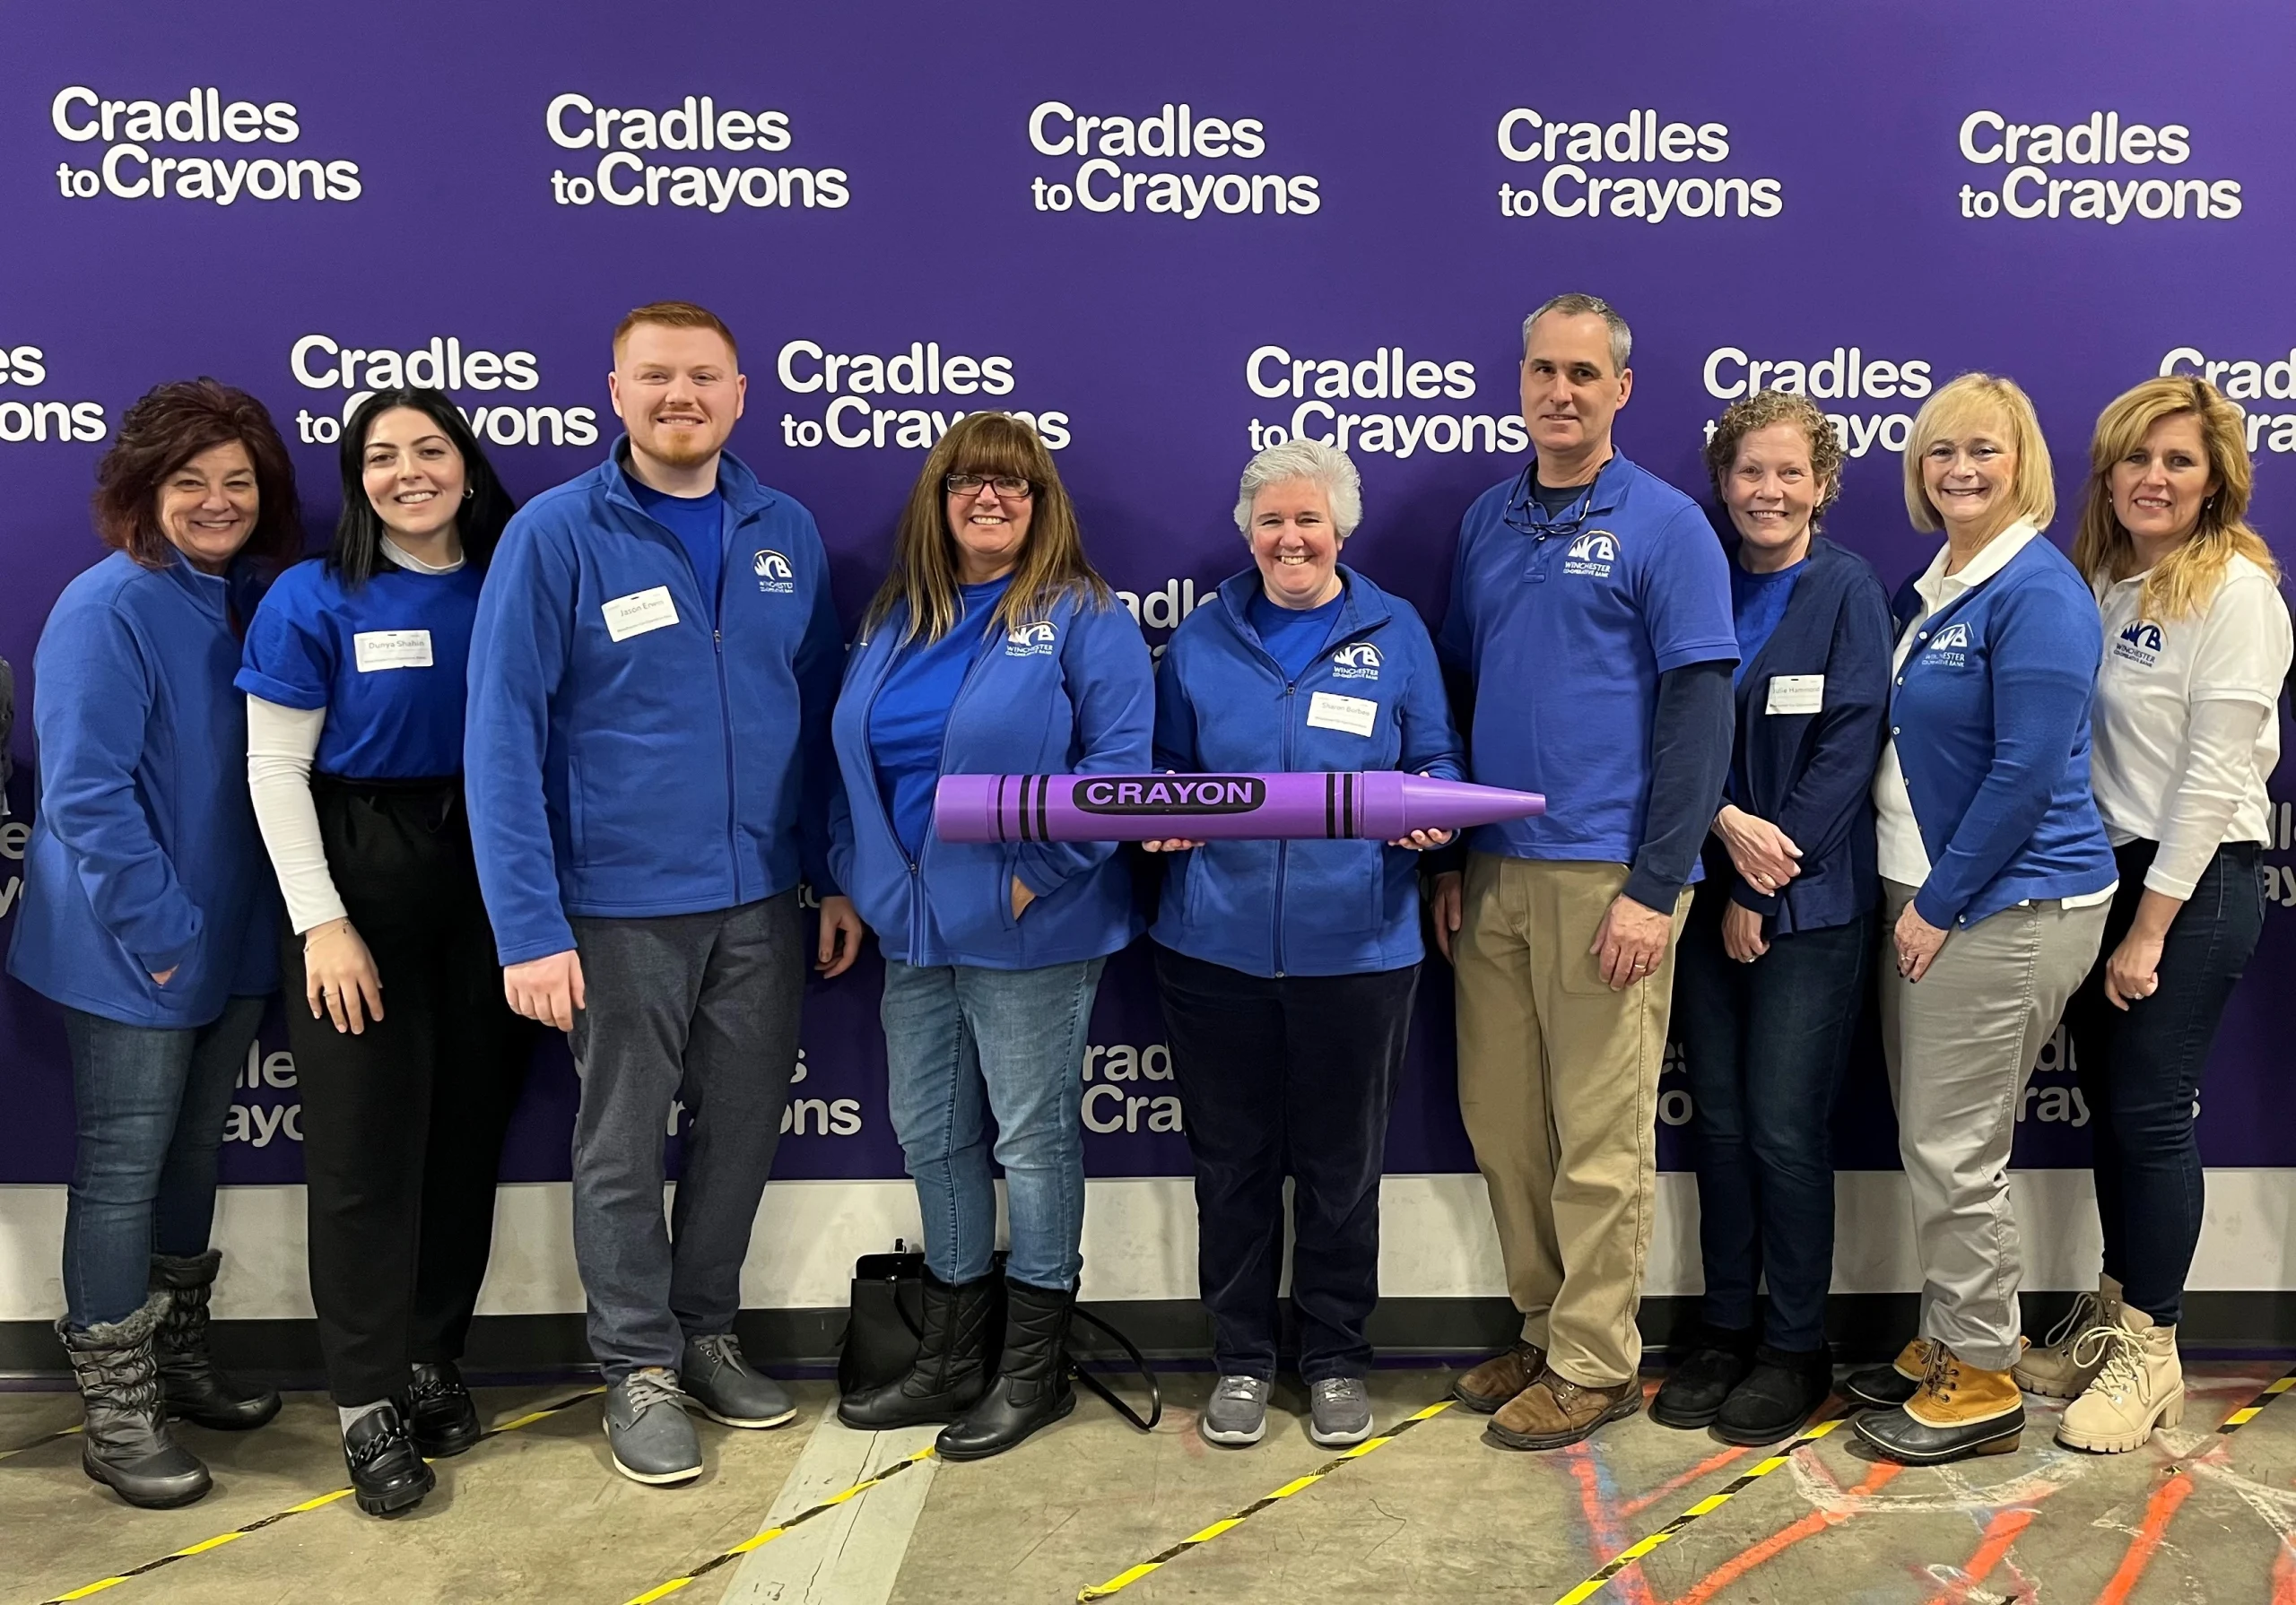 Group of Bankers in front of Cradles for Crayons Backdrop